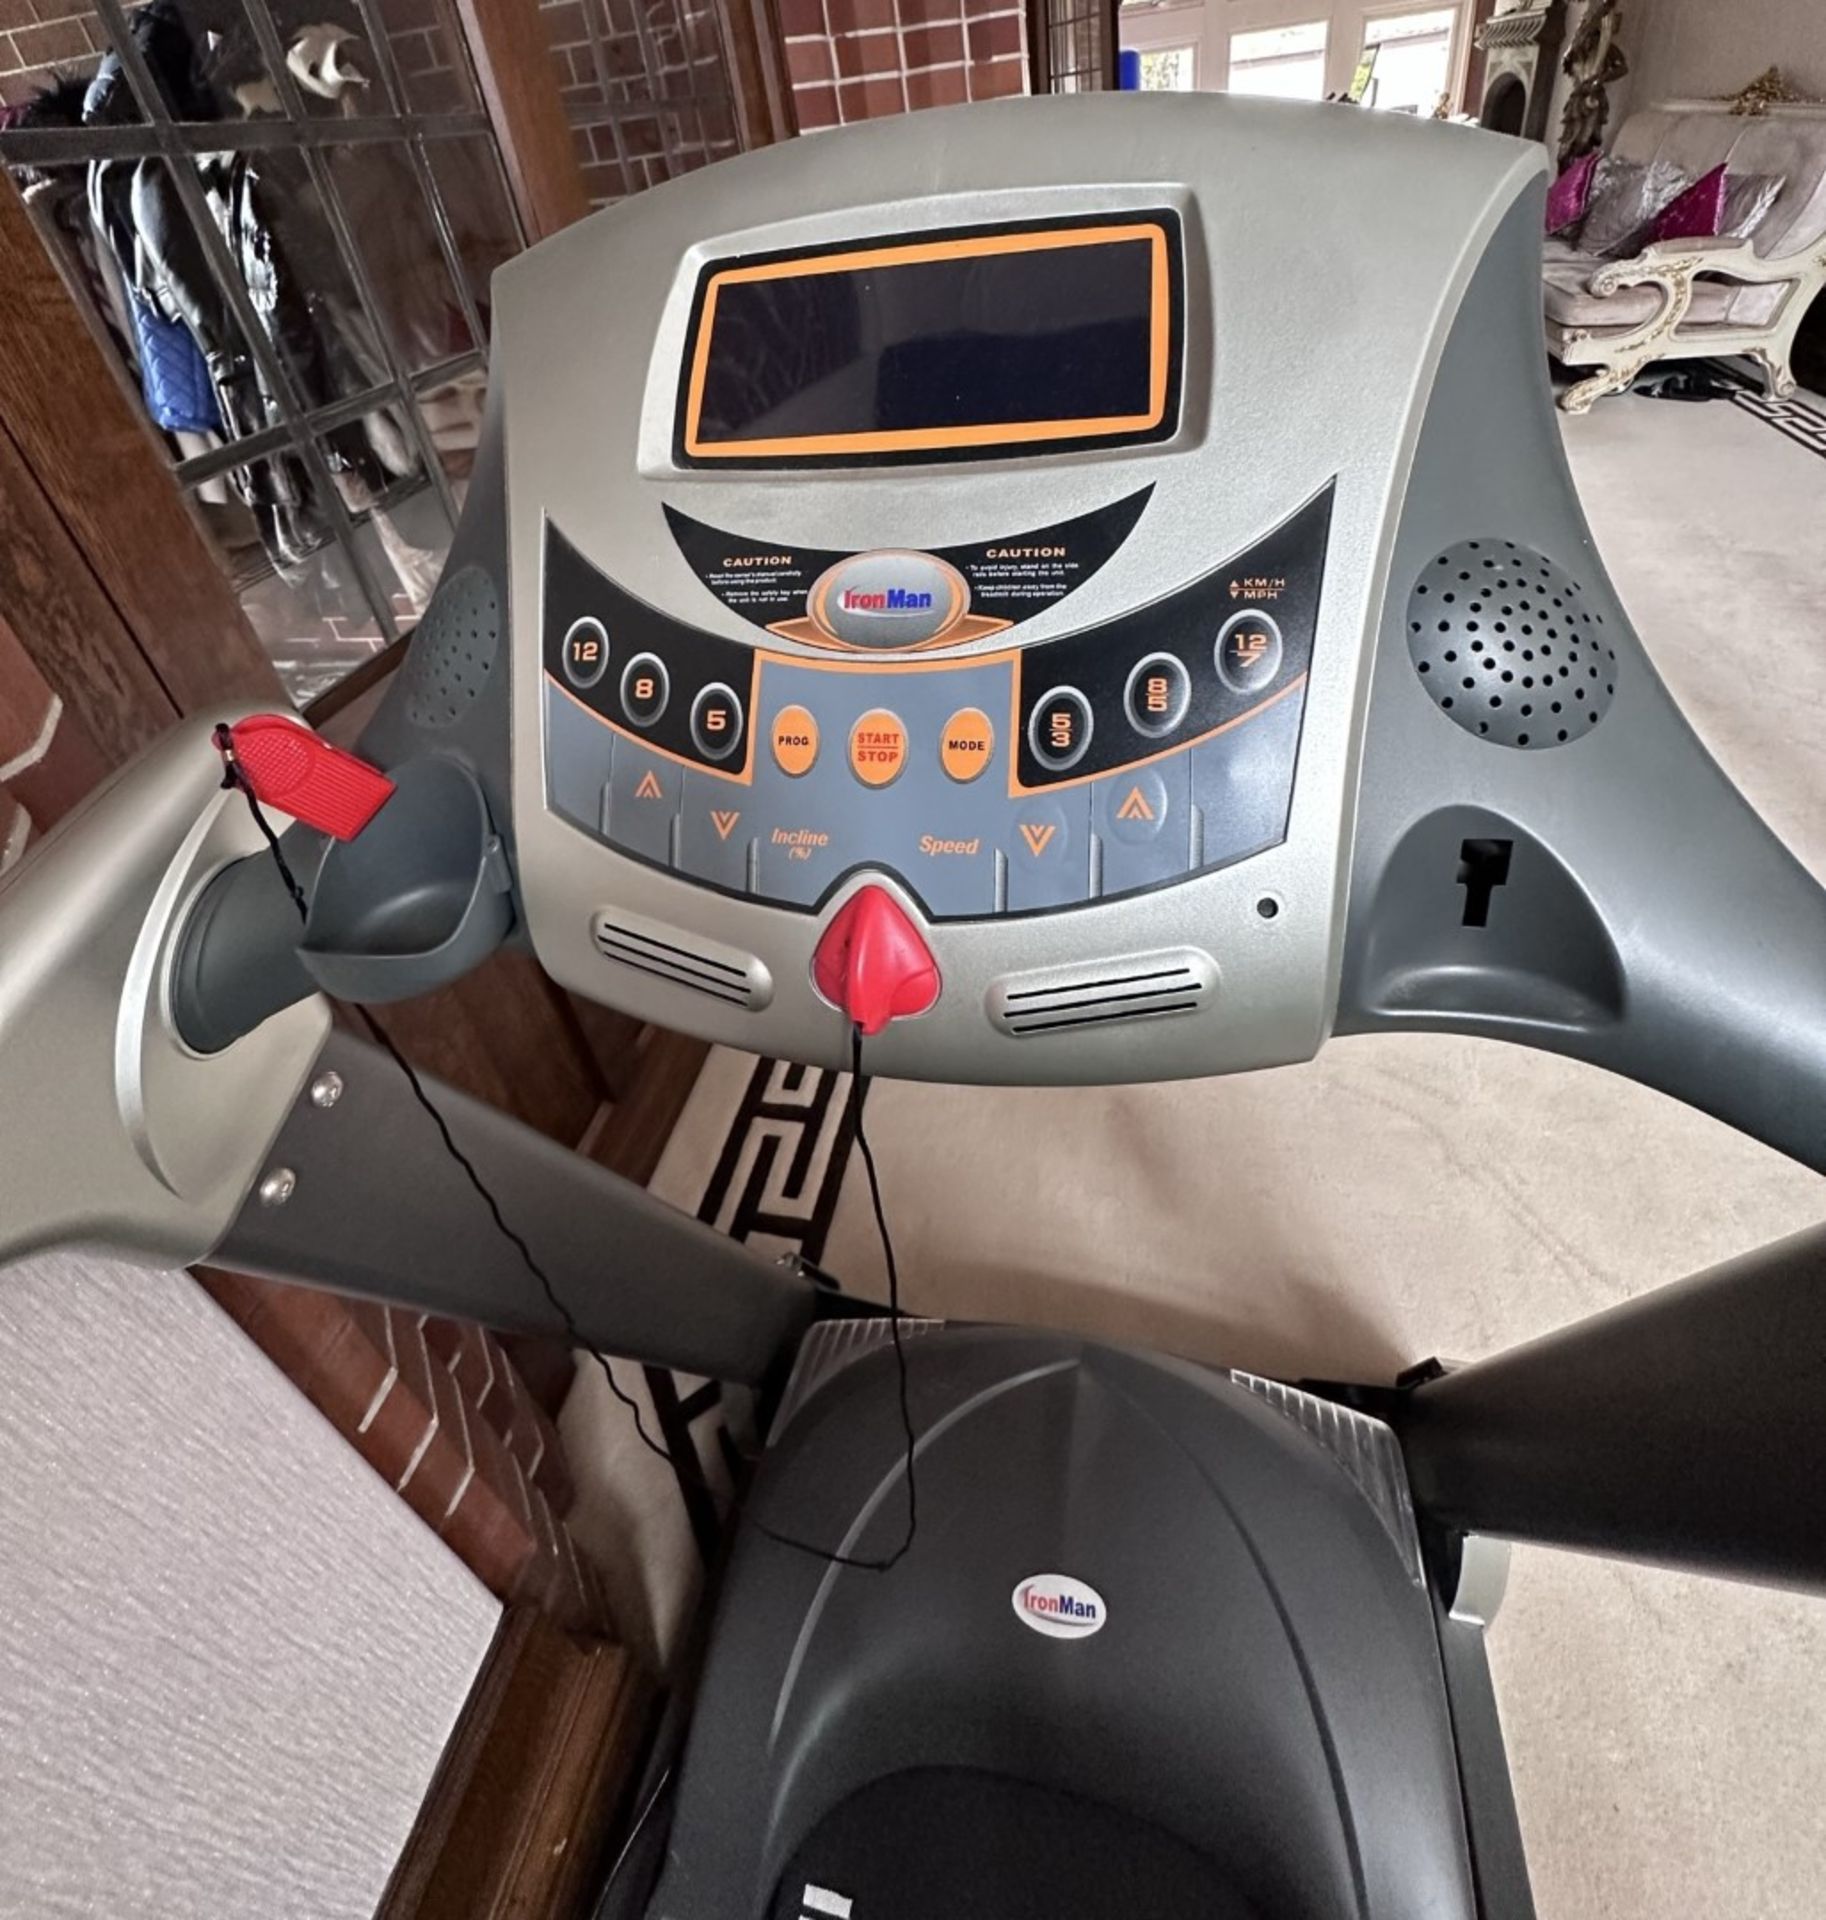 1 x IRON MAN D160 Running Machine With Backlit Screen And Speed/Incline Control Handlebars. - Image 5 of 10